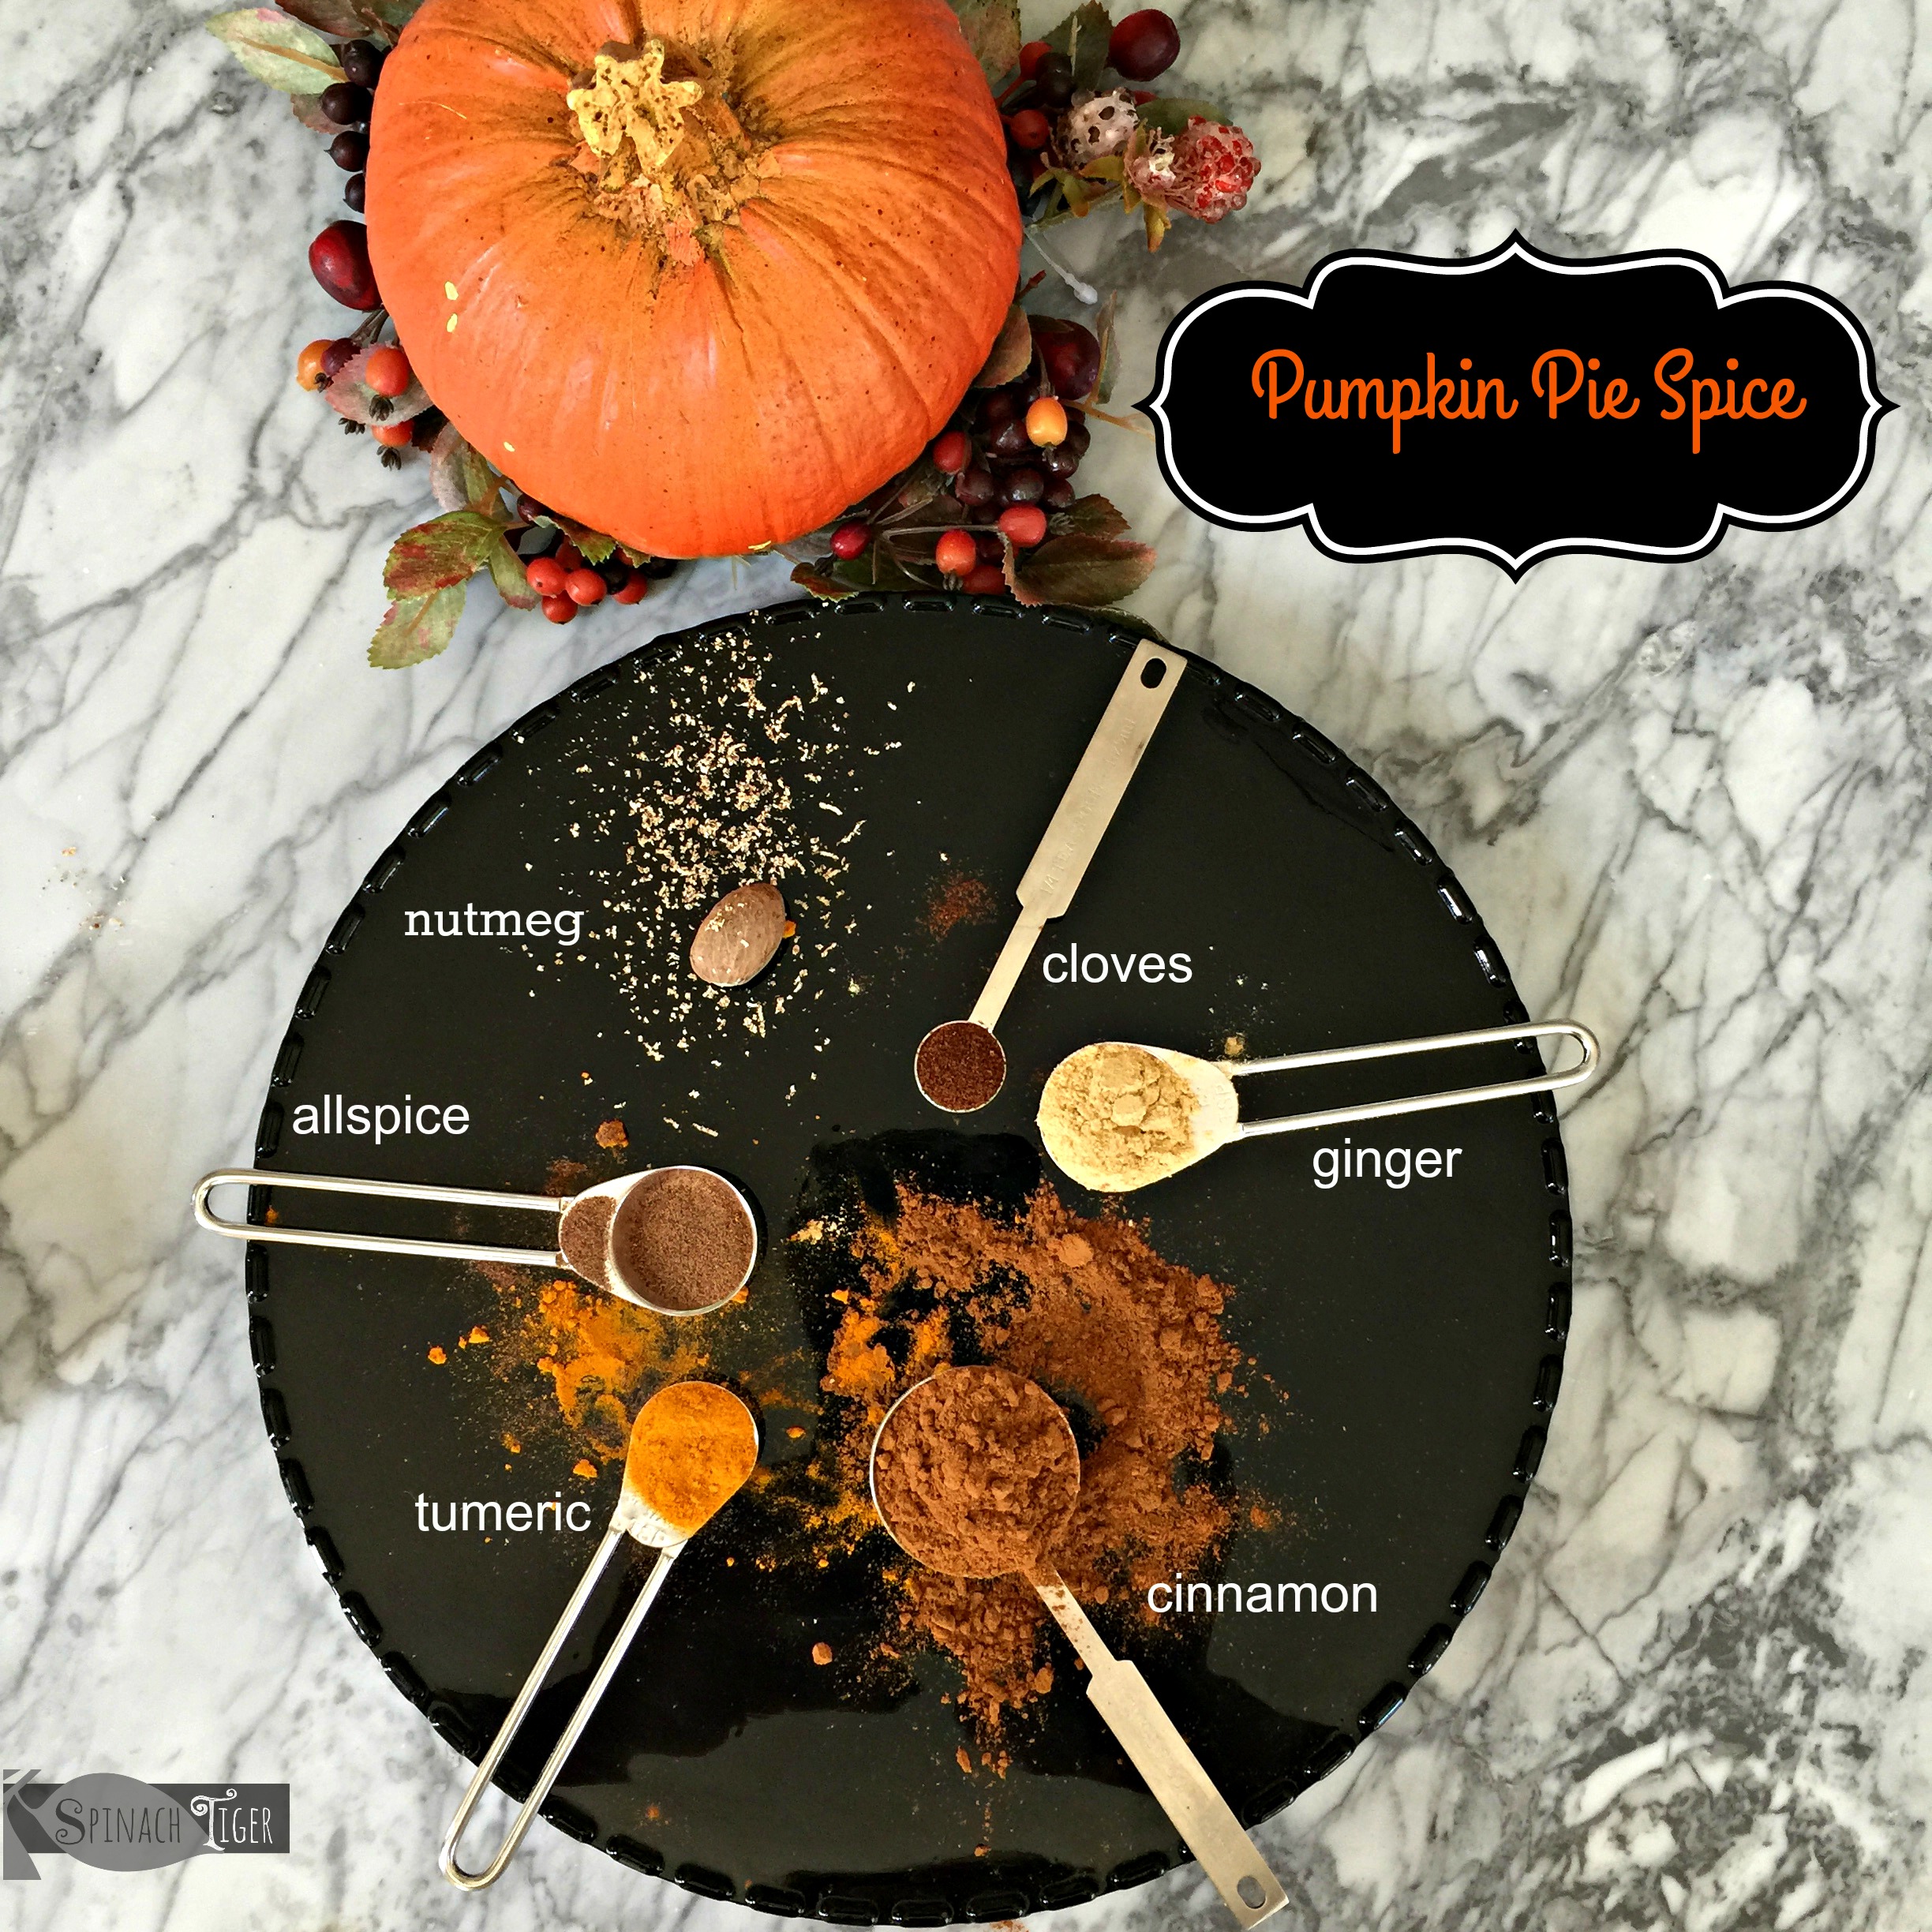 How to Make Pumpkin Pie Spice from Spinach TIger